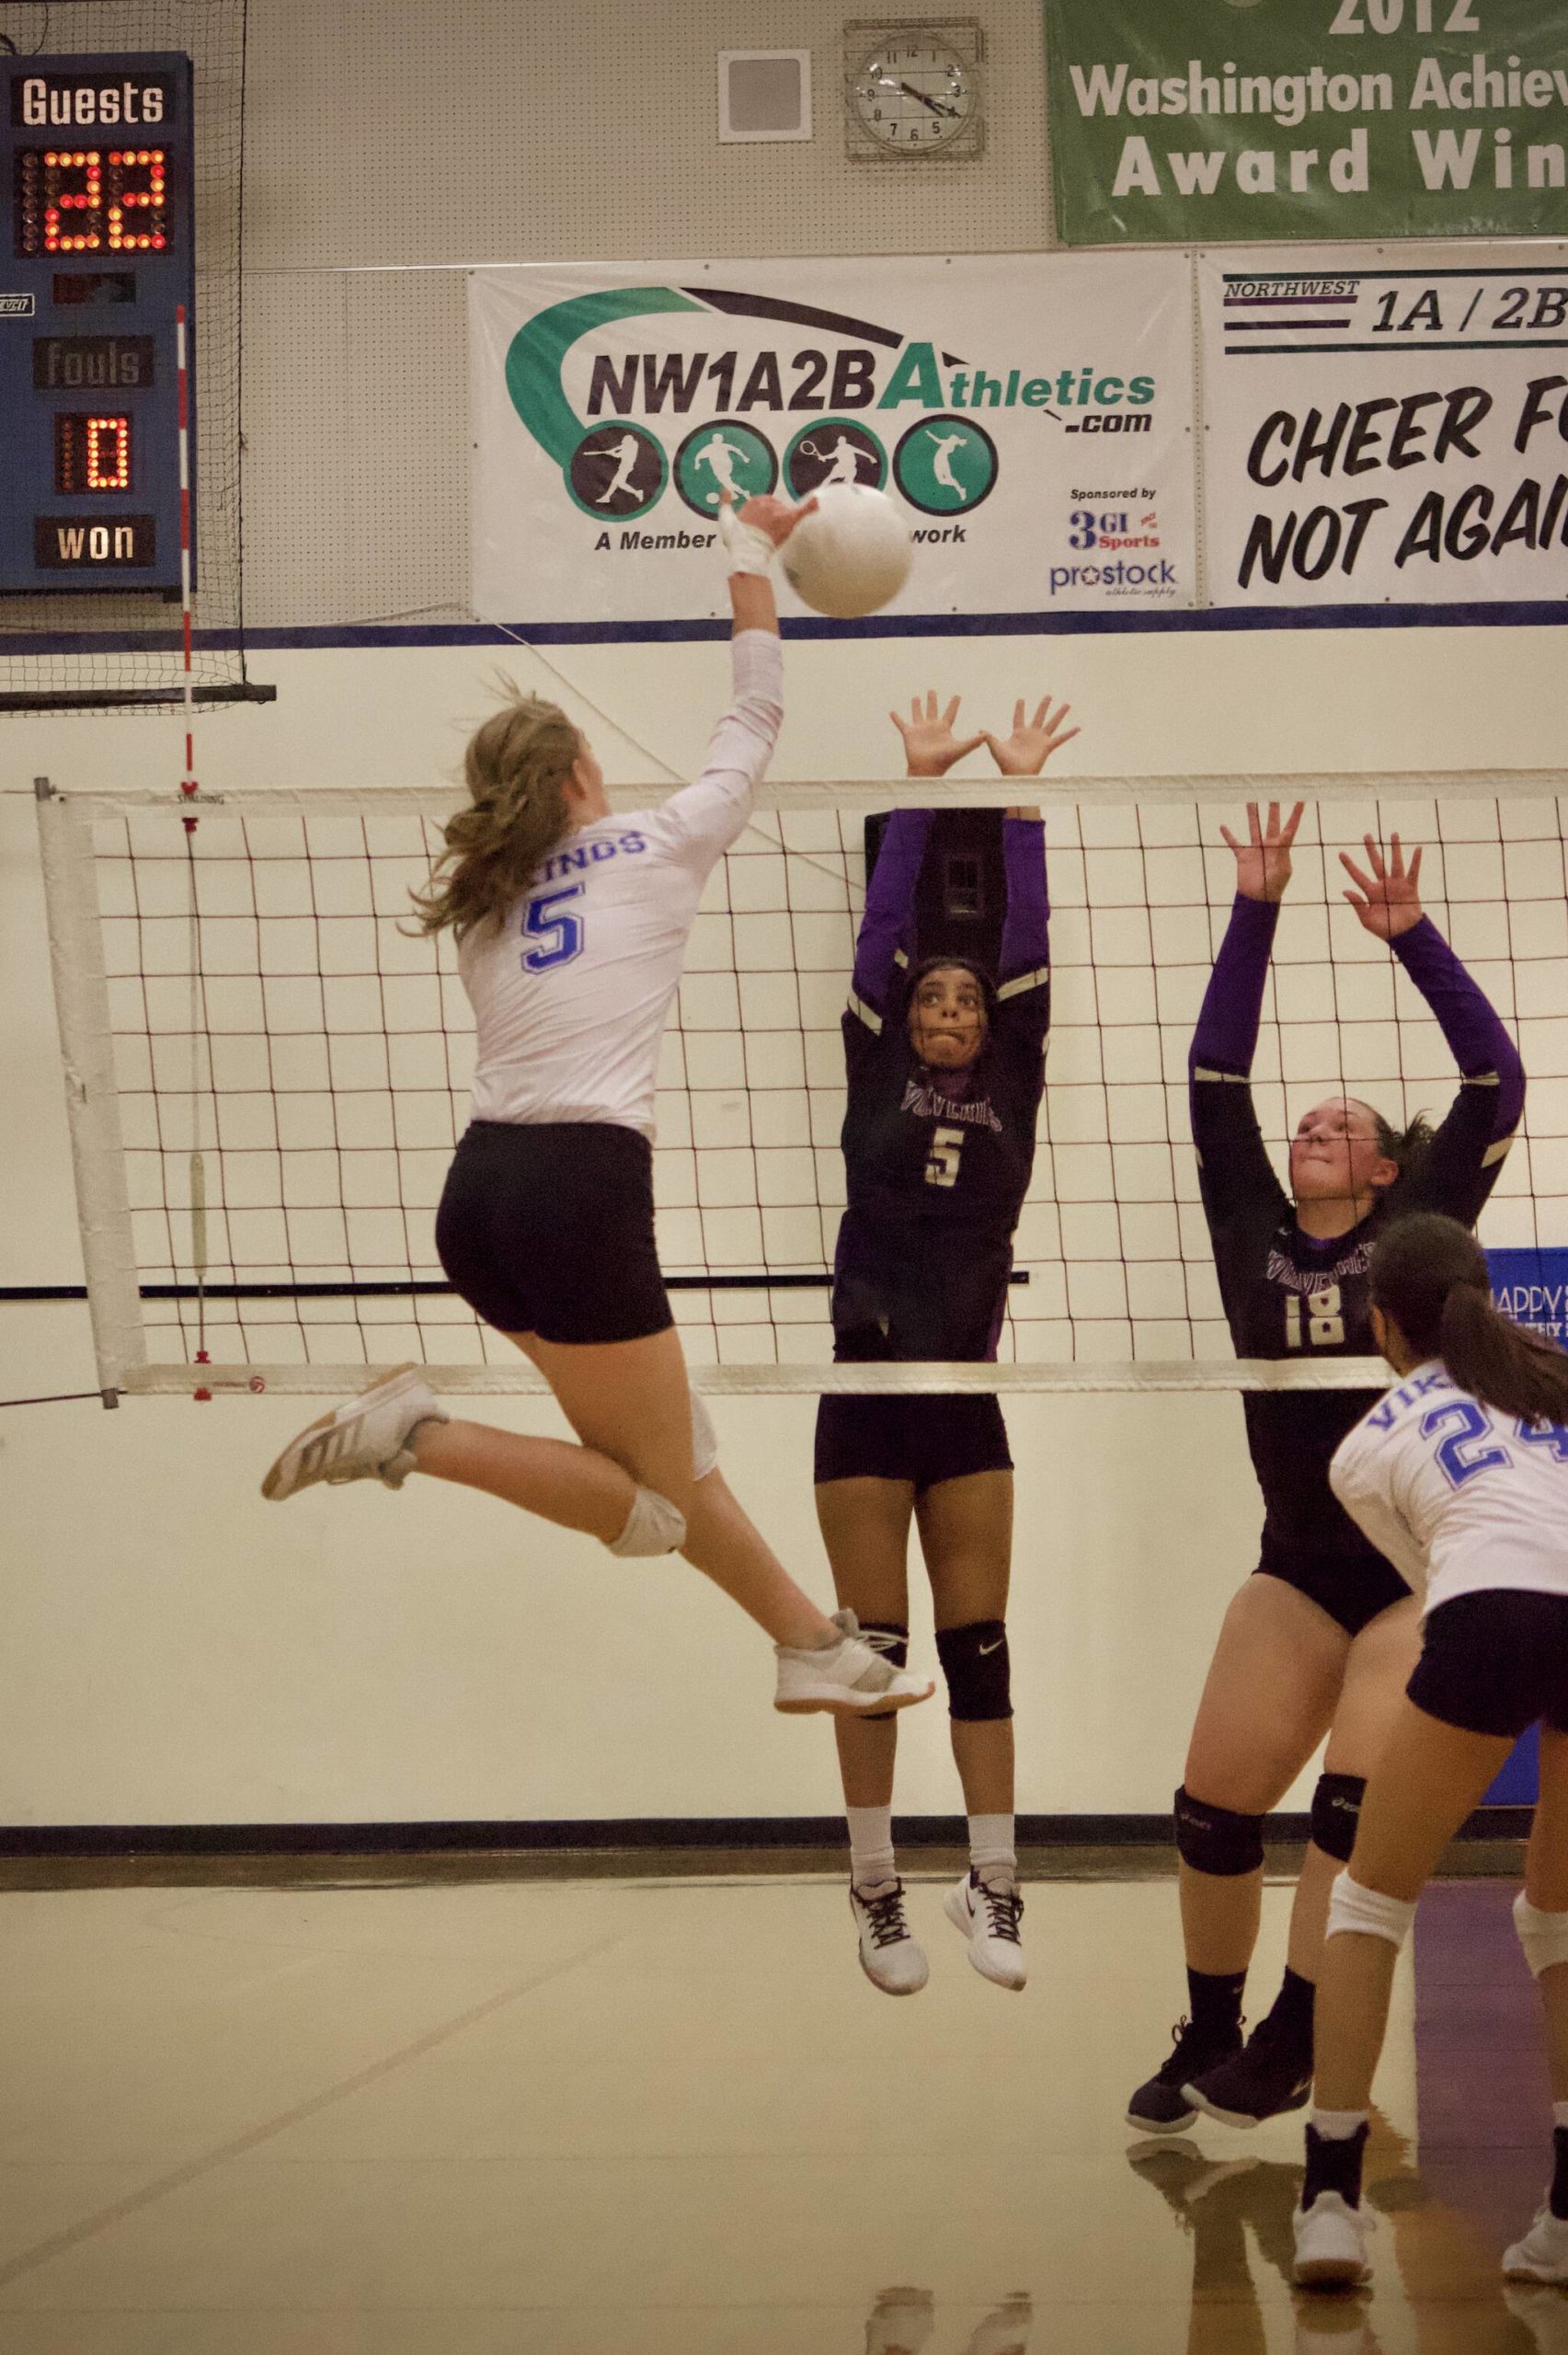 Corey Wiscomb photo
While only playing a select few minutes, sophomore Bethany Carter had a moment to display her power, grace, and finesse all in this one kill.